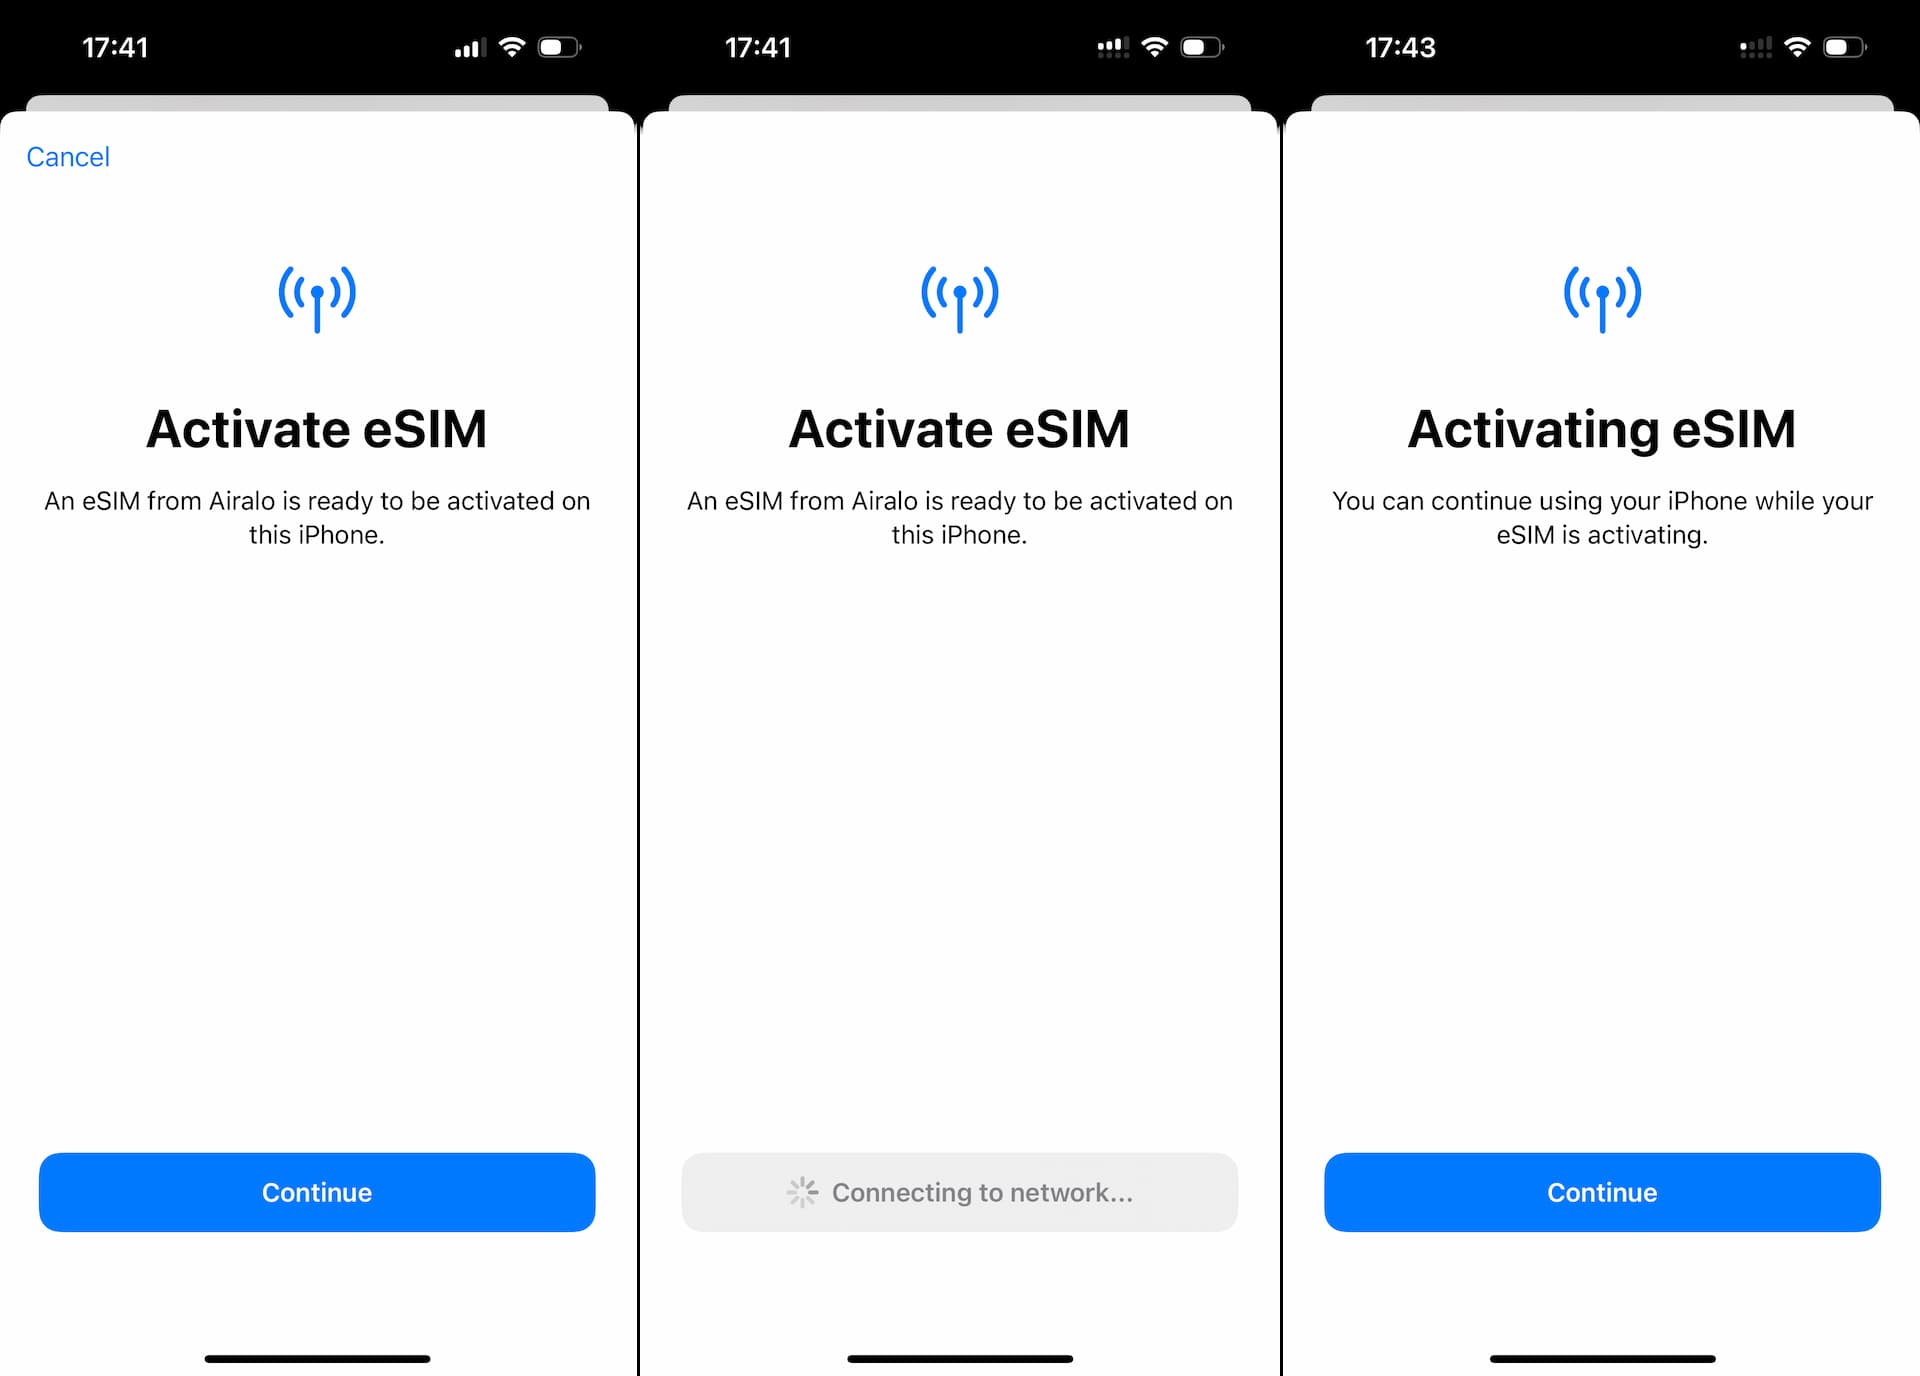 How To Activate an eSIM with Activation Code and SM-DP+ Address on iPhone